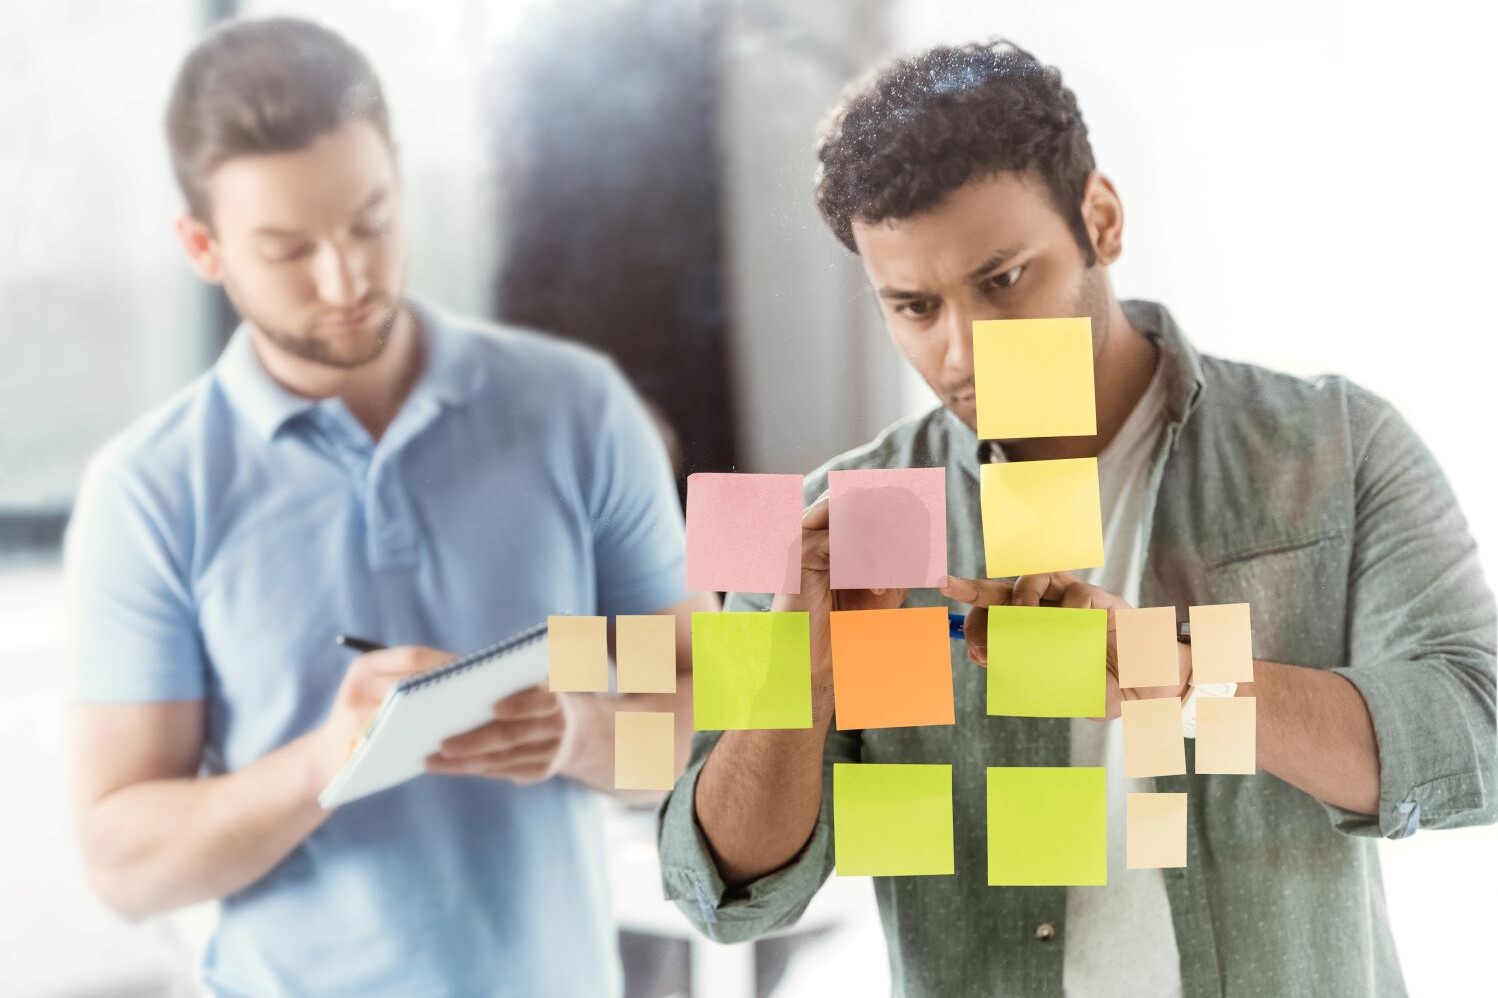 Two casual businessmen review colorful post it notes to turn consumer insights into concepts for marketing.